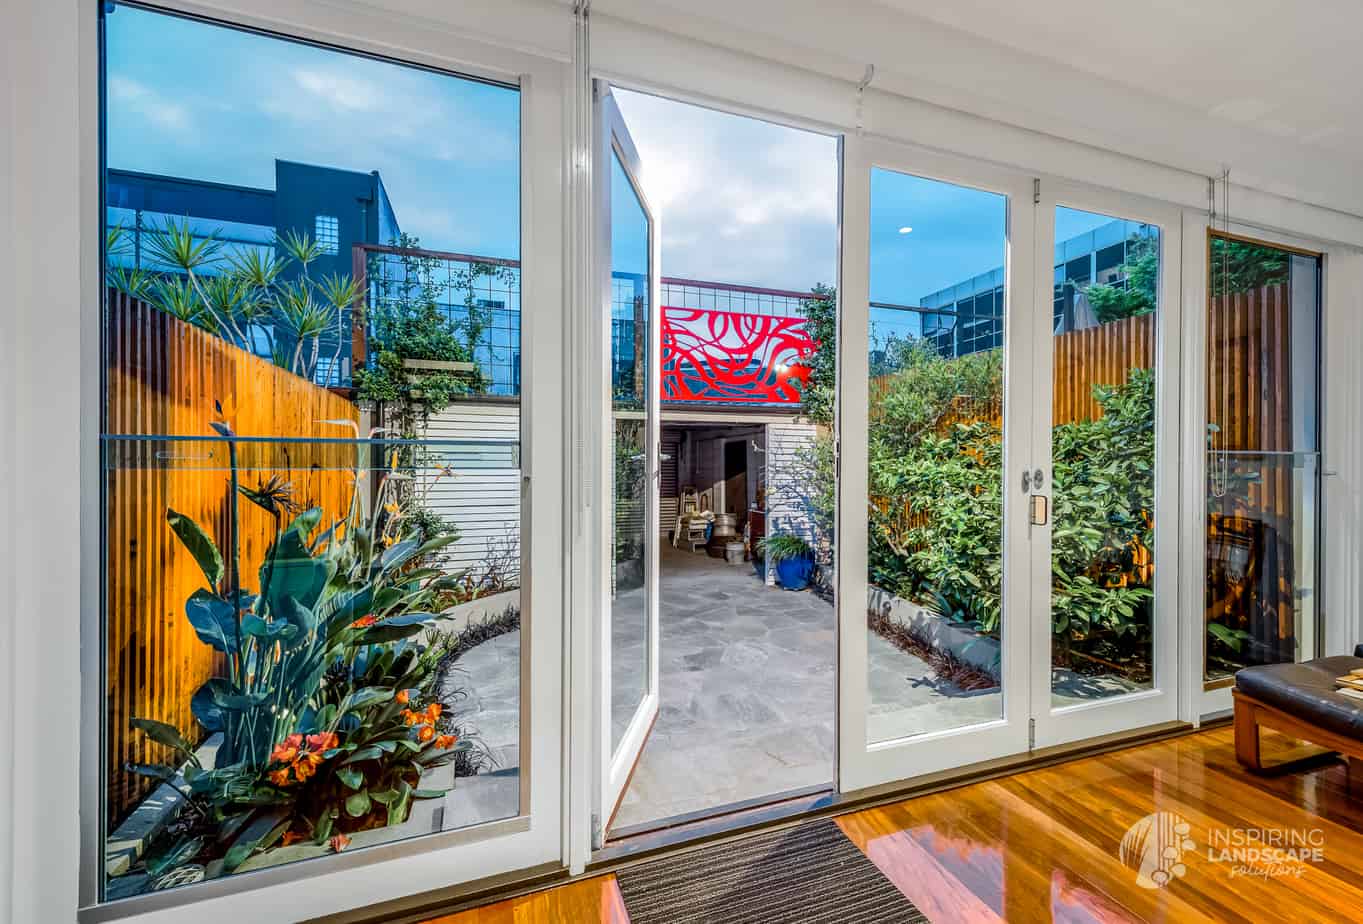 View from internal living spaces of Hawthorn East courtyard garden design by Parveen Dhaliwal